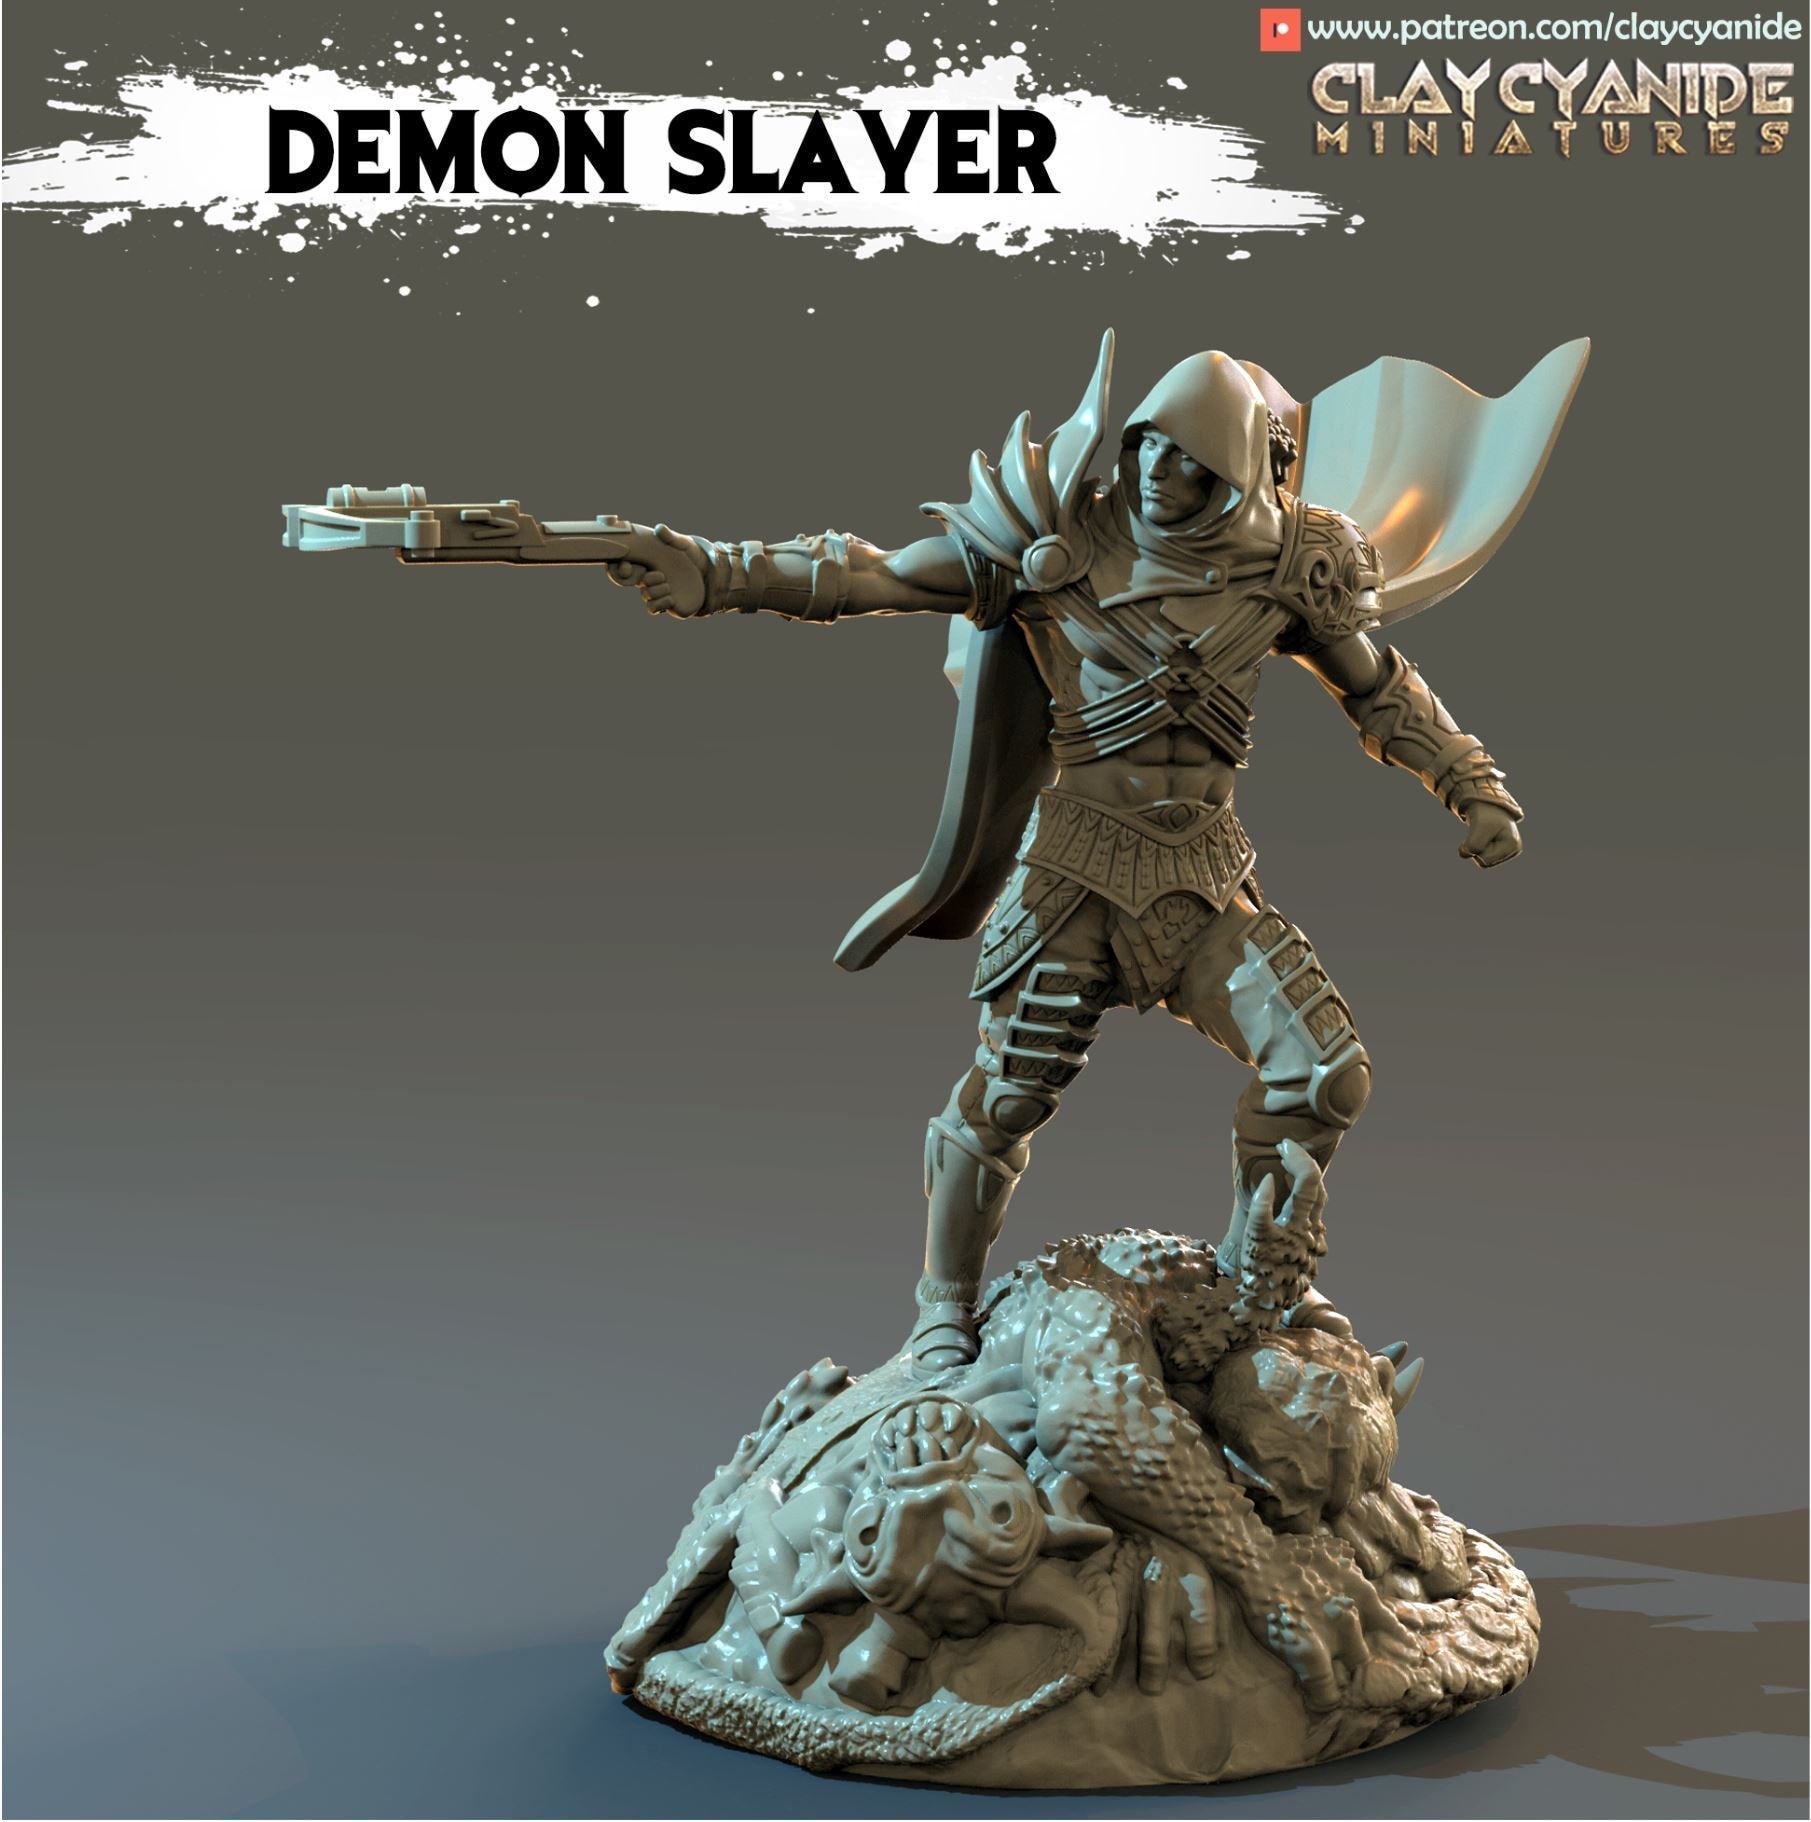 Demon Slayer from Clay Cyanide Miniatures. This piece is very much a Premium Print!